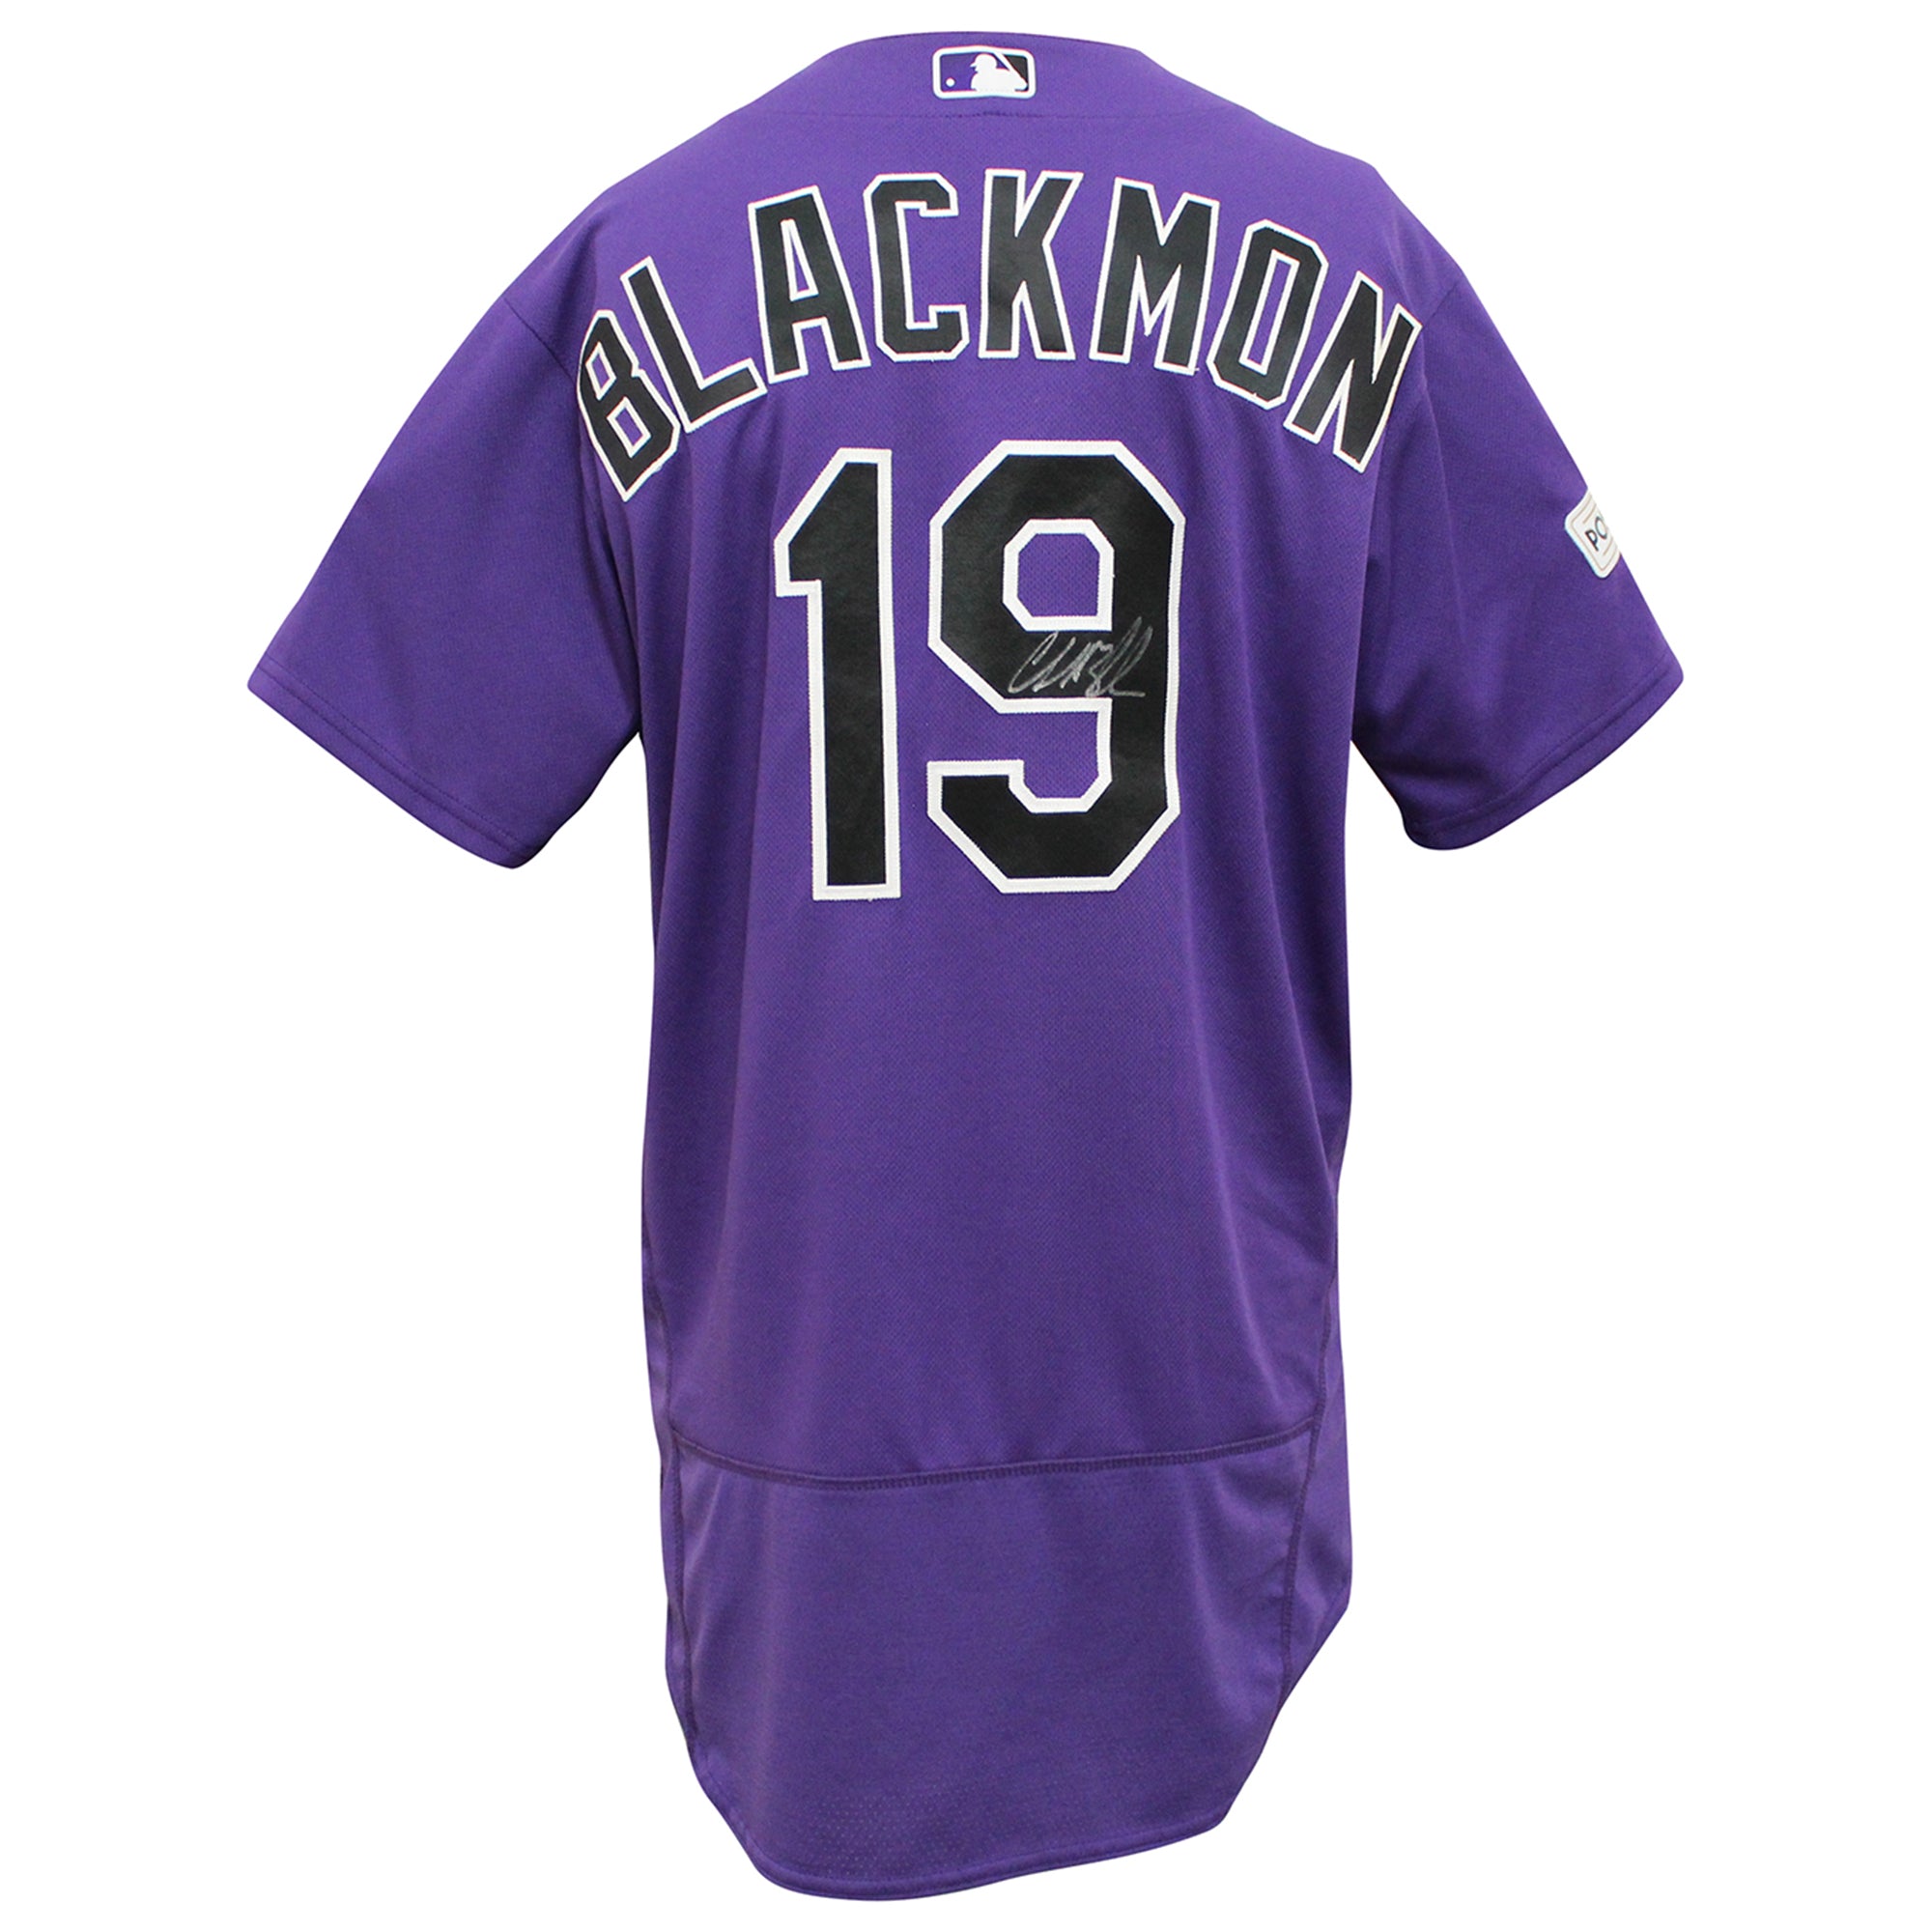 2022 Game-Used Charlie Blackmon Jersey